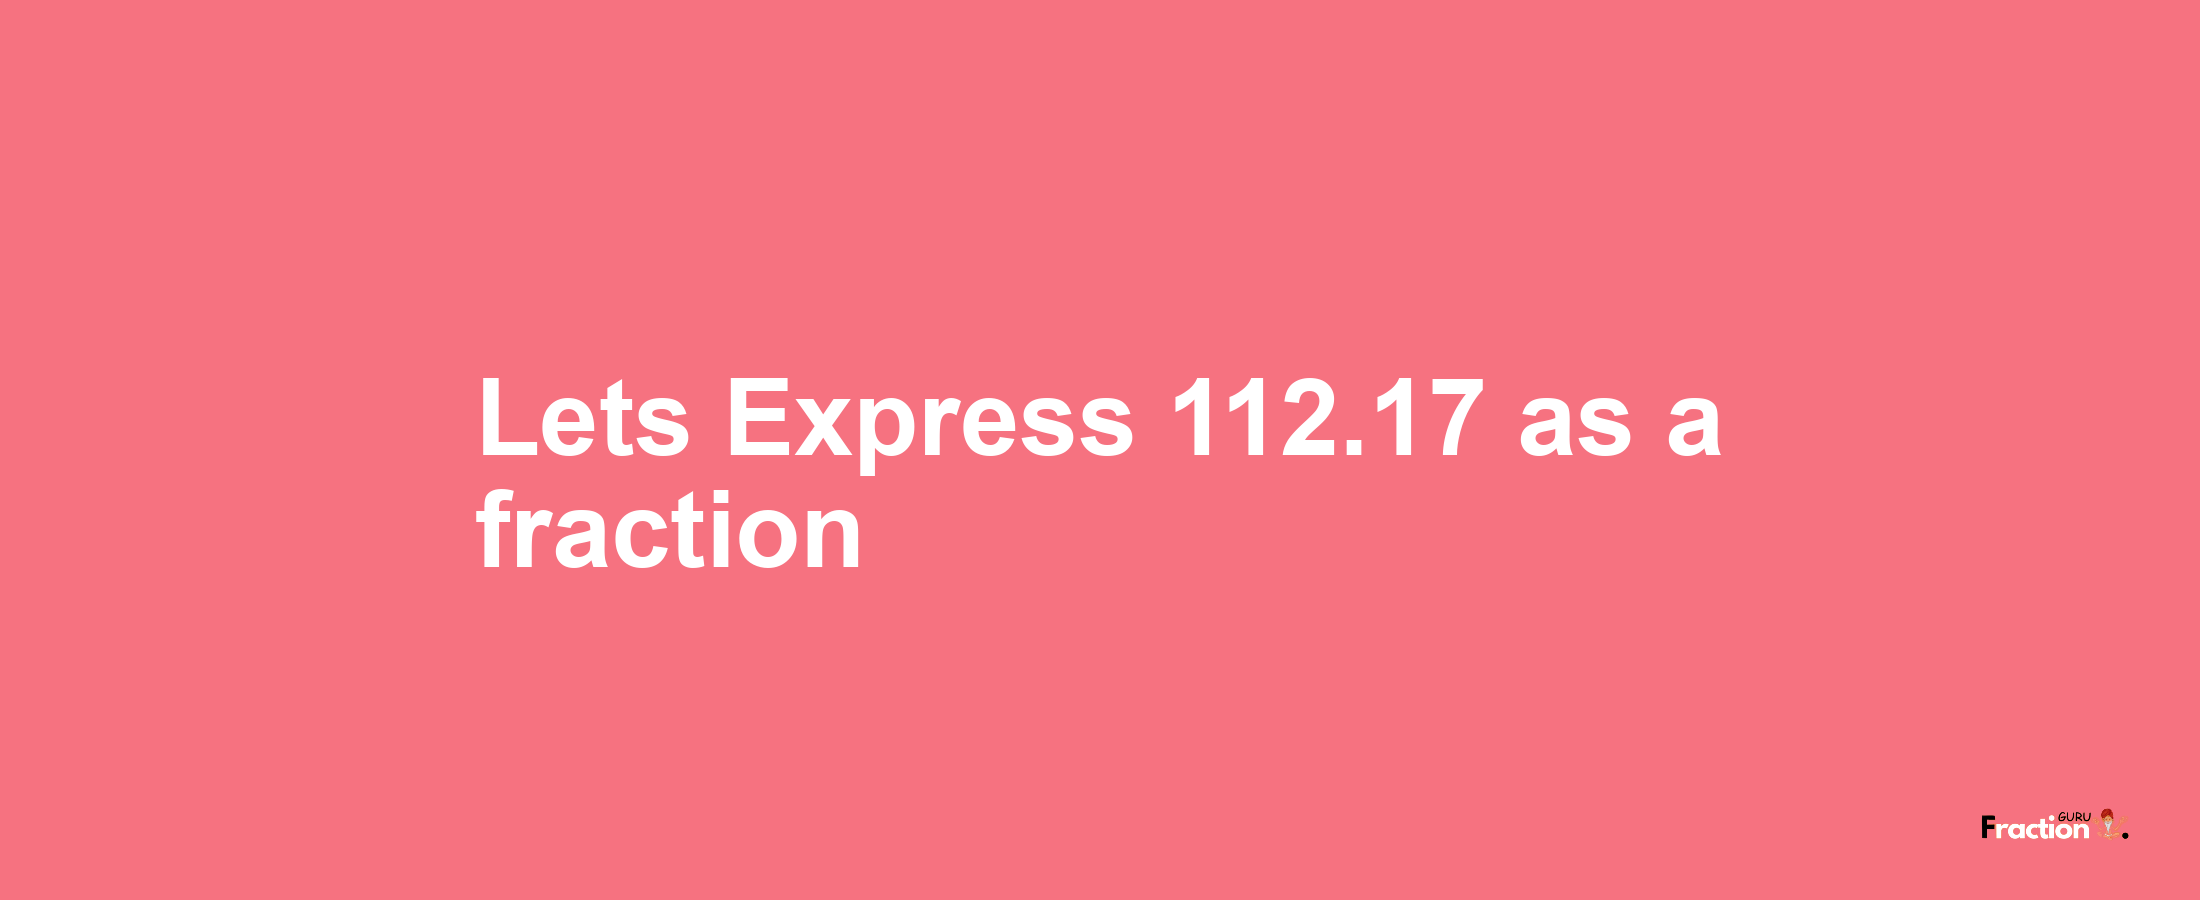 Lets Express 112.17 as afraction